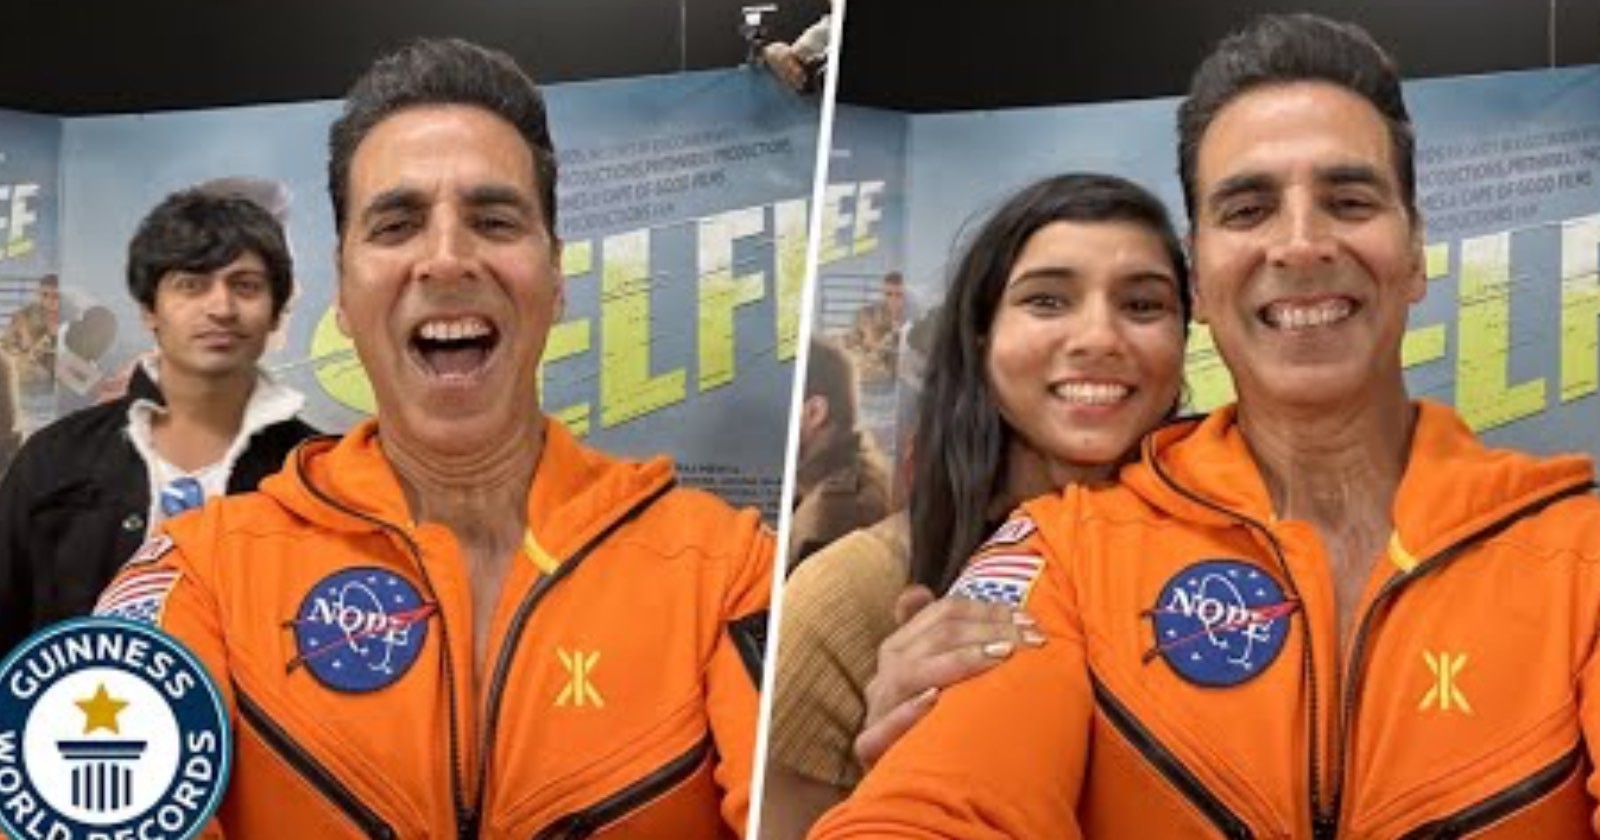 Selfie World Record Broken after Actor Takes 184 Photos in Three Minutes